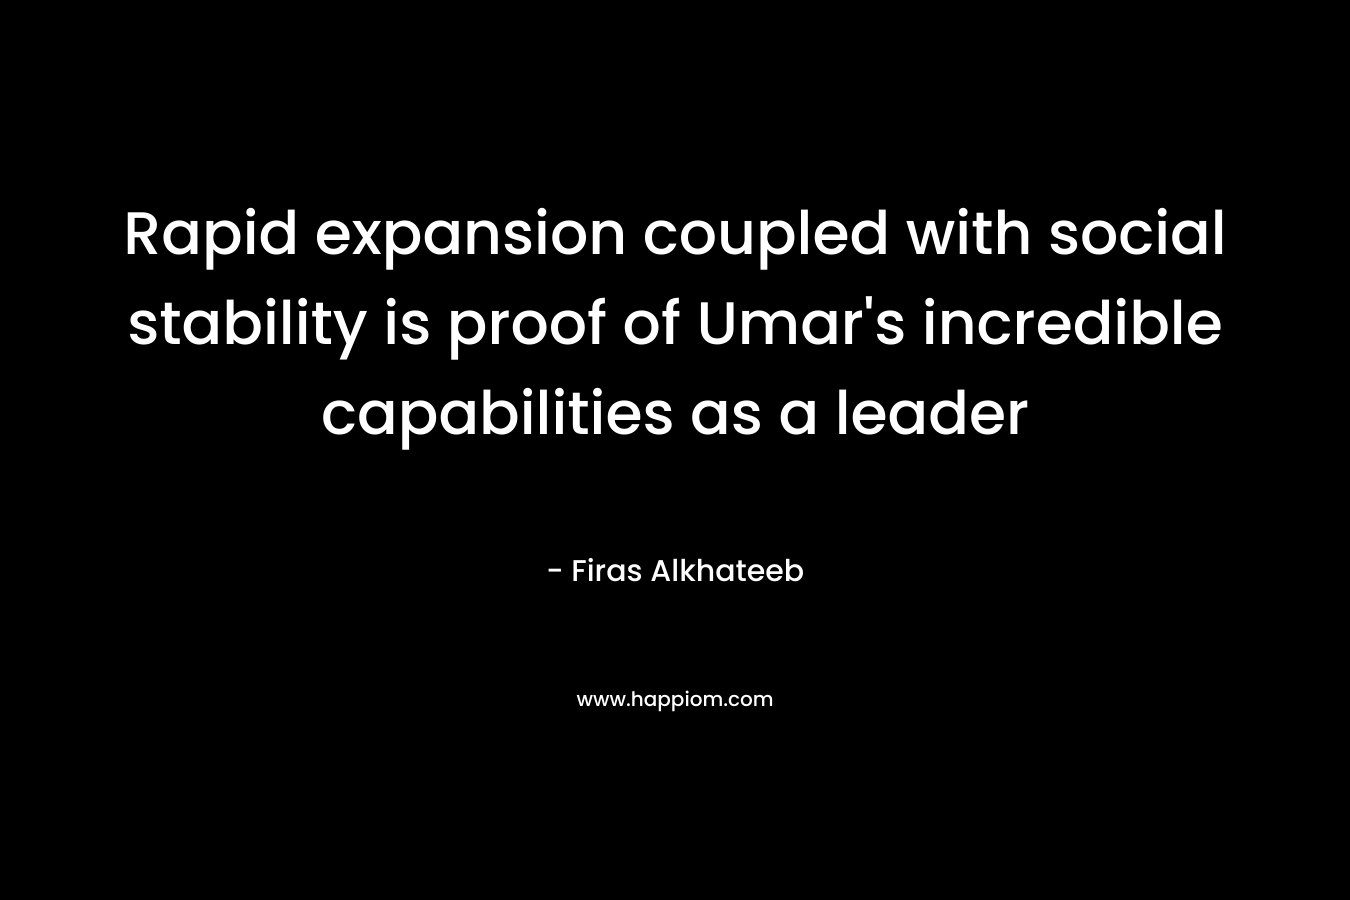 Rapid expansion coupled with social stability is proof of Umar’s incredible capabilities as a leader – Firas Alkhateeb